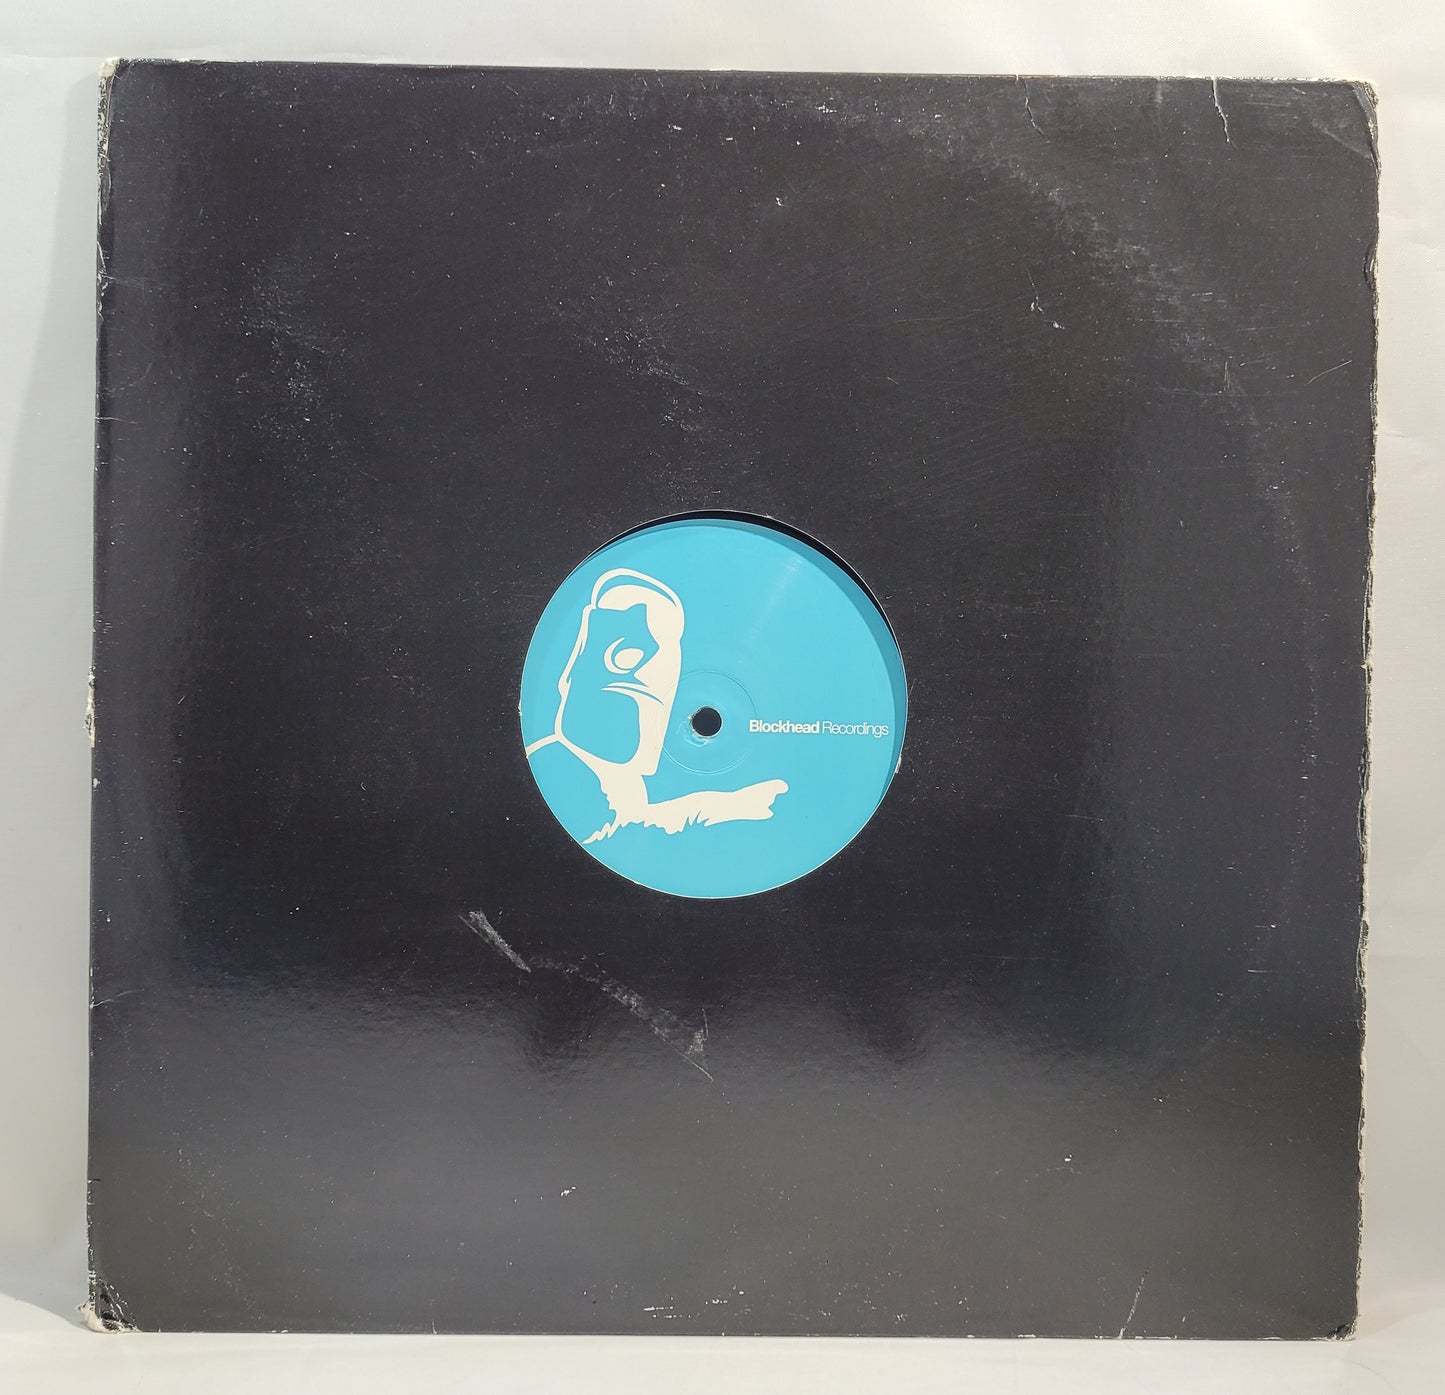 Special Forces - So Phunky EP [Vinyl Record 12" Single]